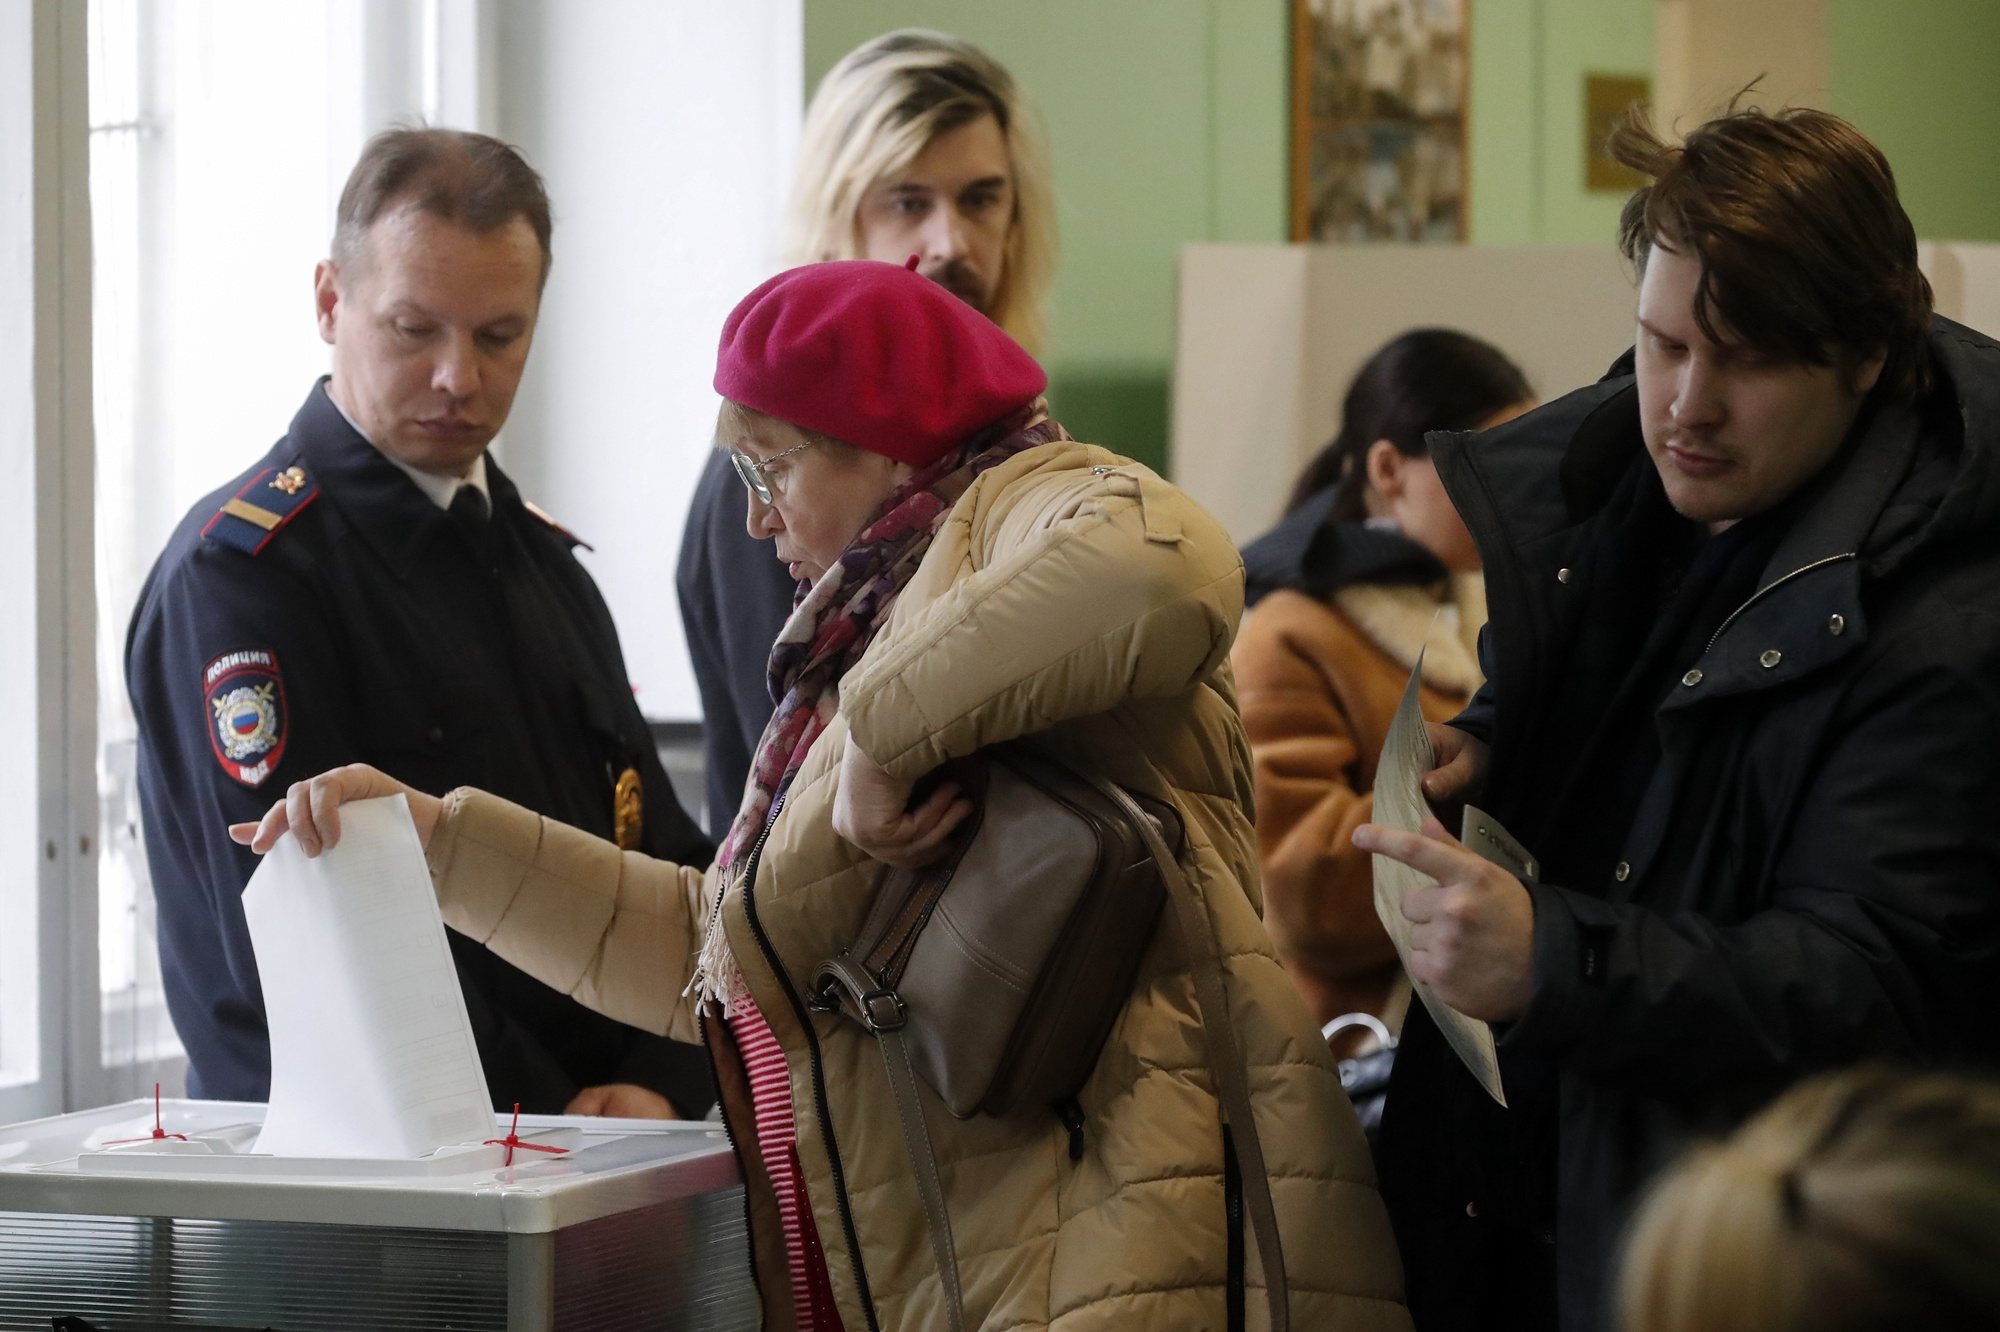 epa11225508 People cast their ballots during the presidential elections in Moscow, Russia, 17 March 2024. The Federation Council has scheduled presidential elections for 17 March 2024. Voting will last three days: March 15, 16 and 17. Four candidates registered by the Central Election Commission of the Russian Federation are vying for the post of head of state: Leonid Slutsky, Nikolai Kharitonov, Vladislav Davankov and Vladimir Putin.  EPA/MAXIM SHIPENKOV